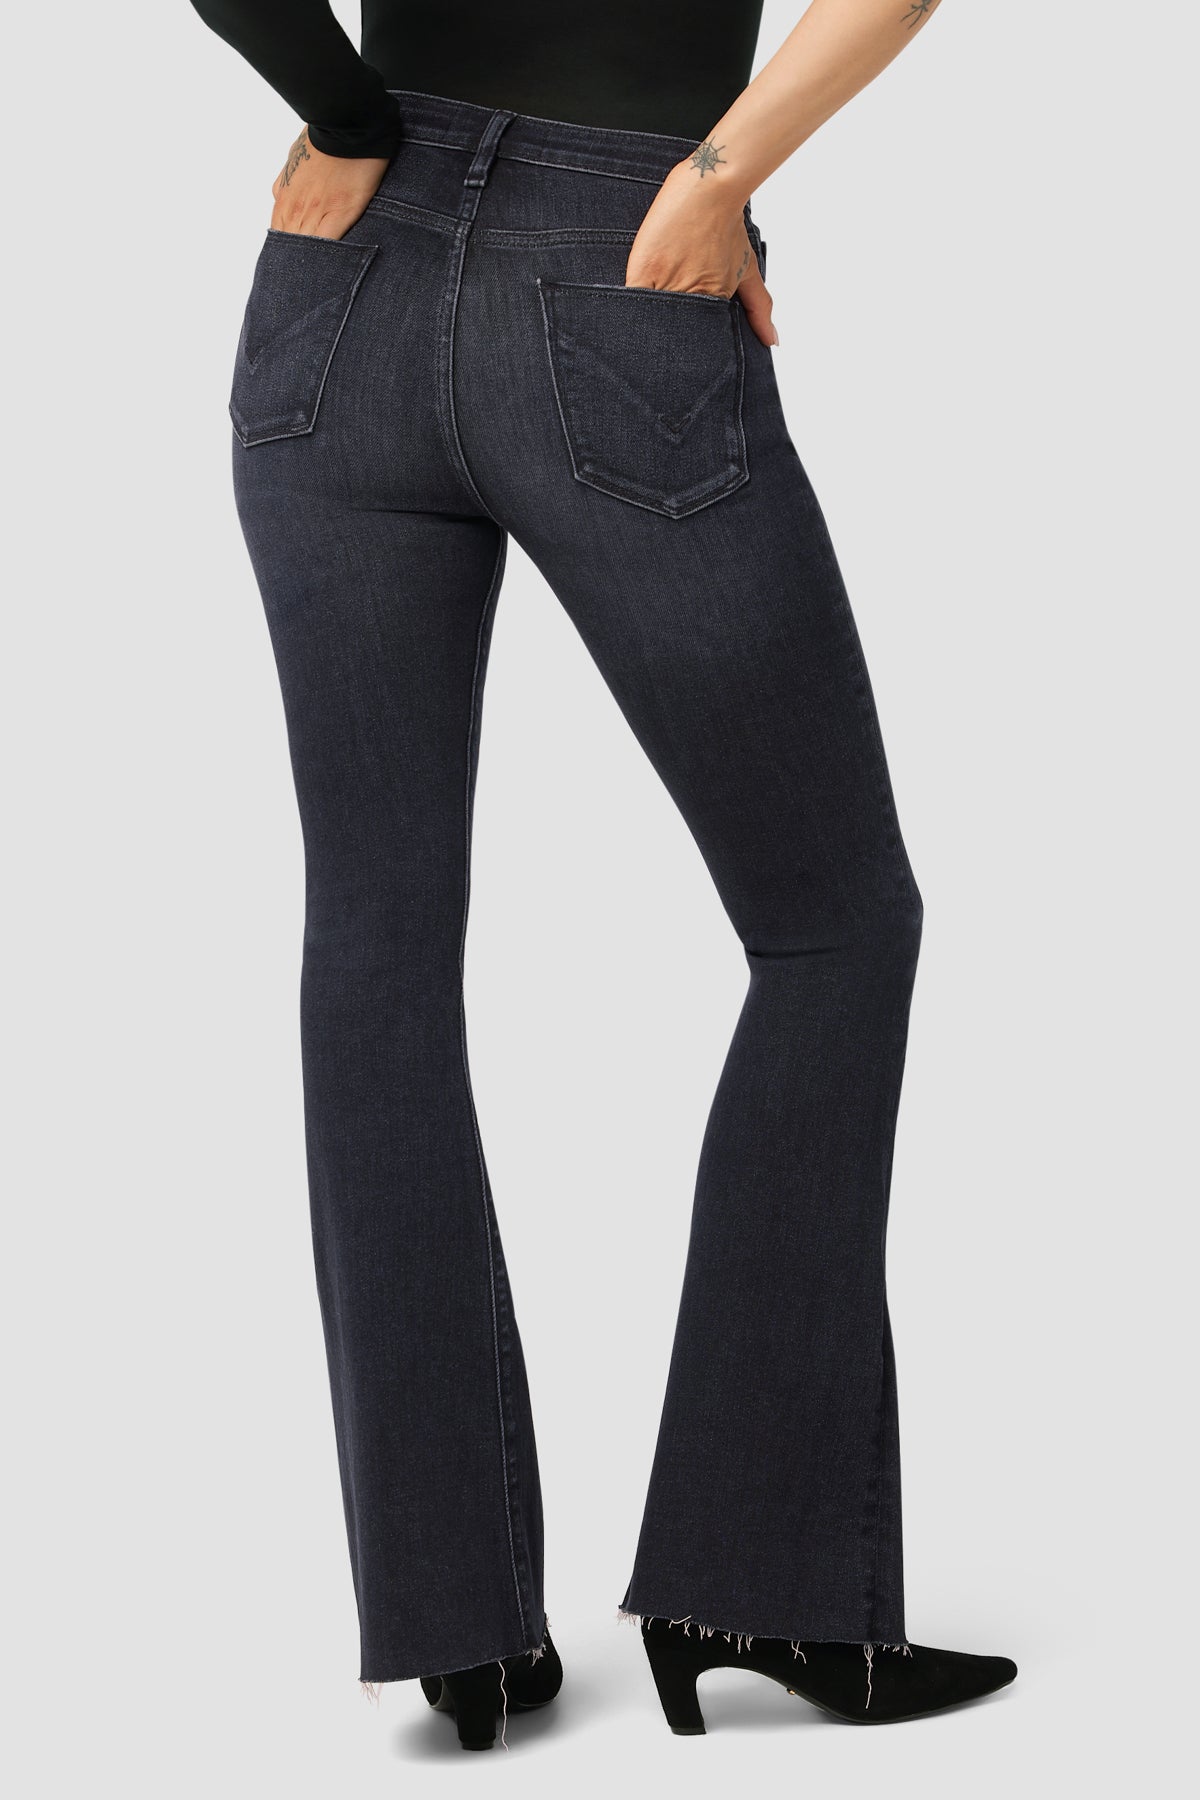 Holly High-Rise Flare Petite Jean